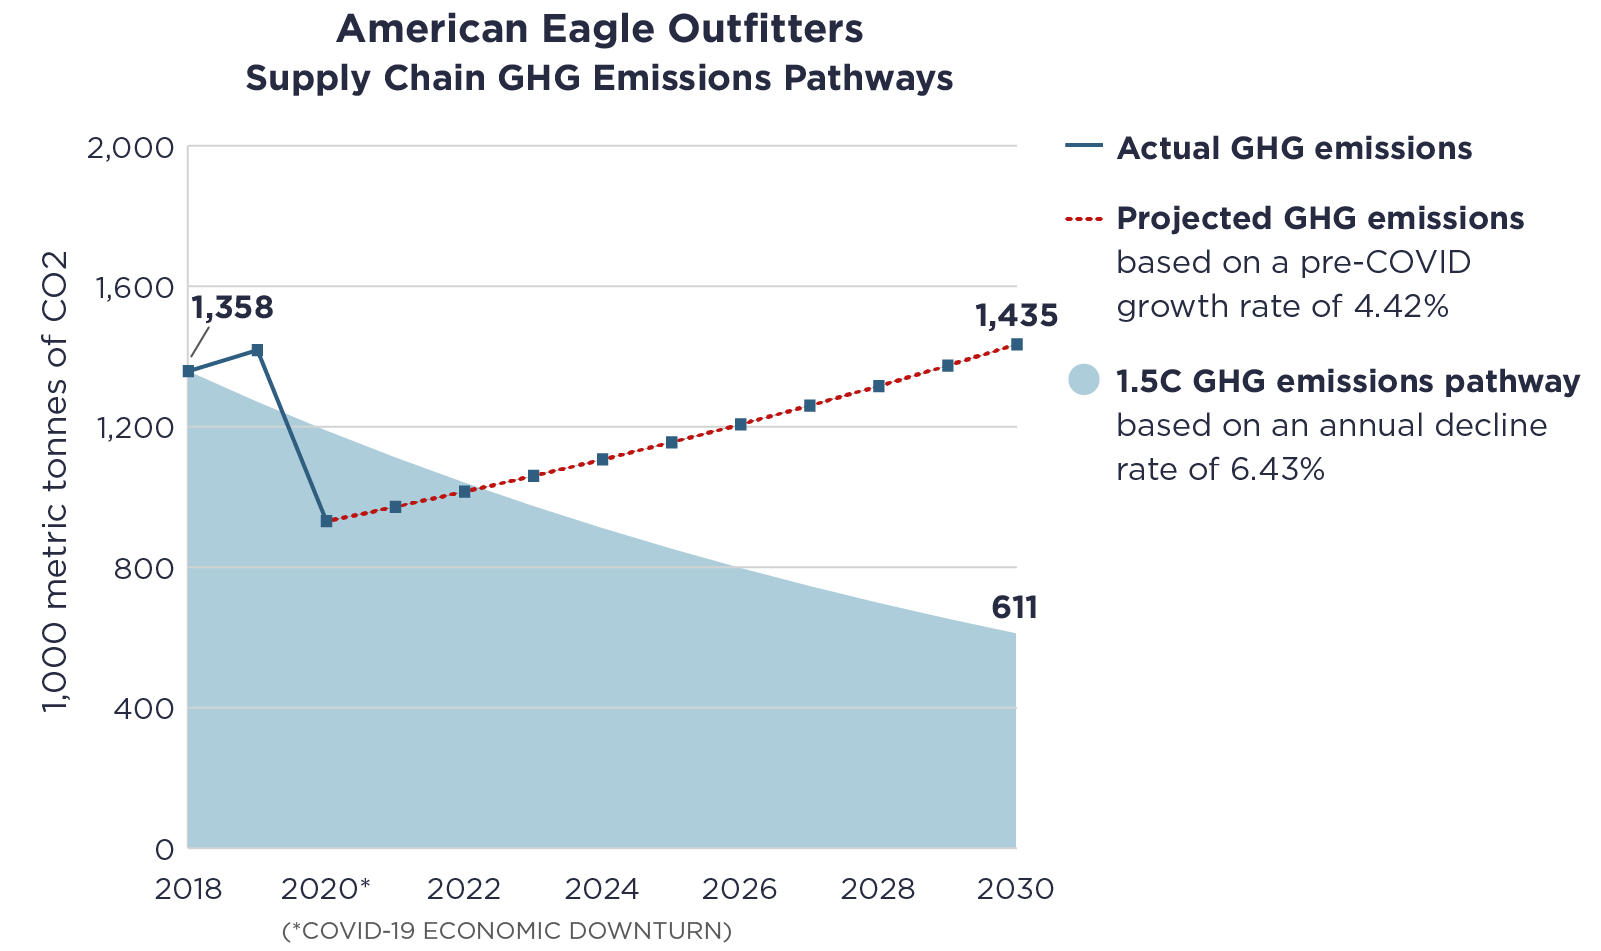 American Eagle Outfiitters graph